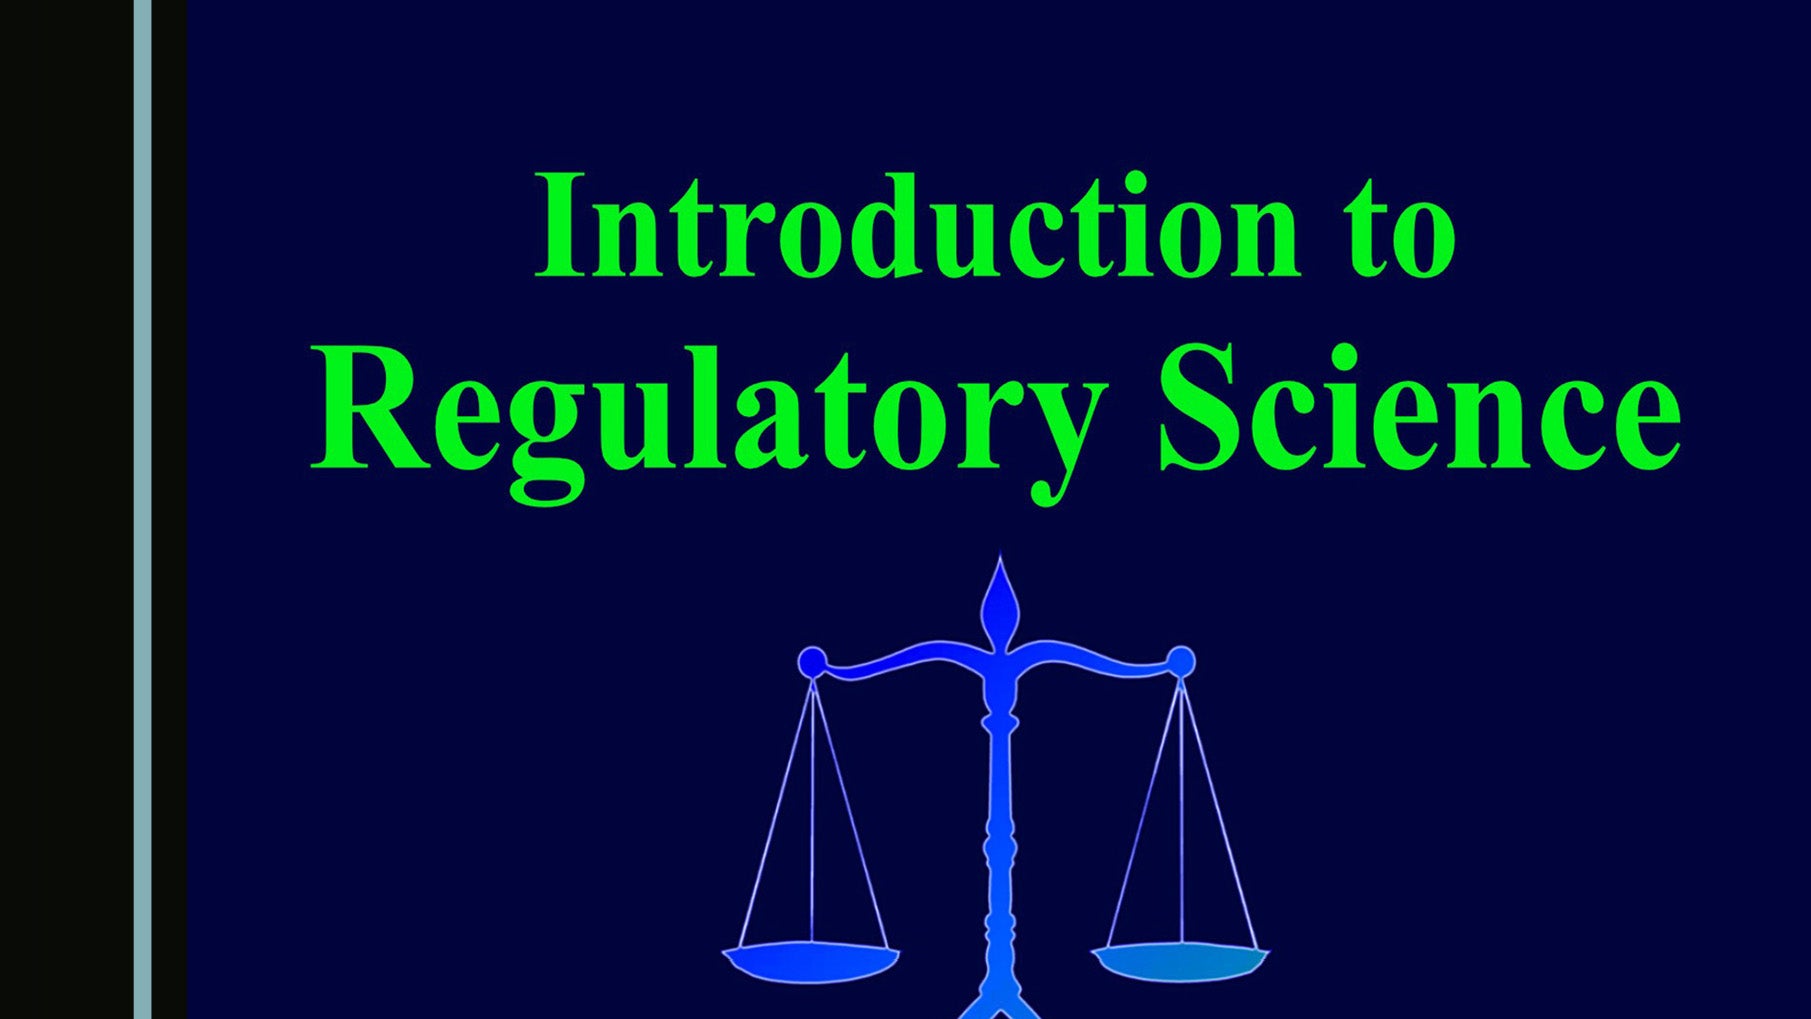 The cover of "Introduction to Regulatory Science," edited by Tomoko Y. Steen, A. Alan Moghissi, Richard A. Calderone and Nyle Hamidi